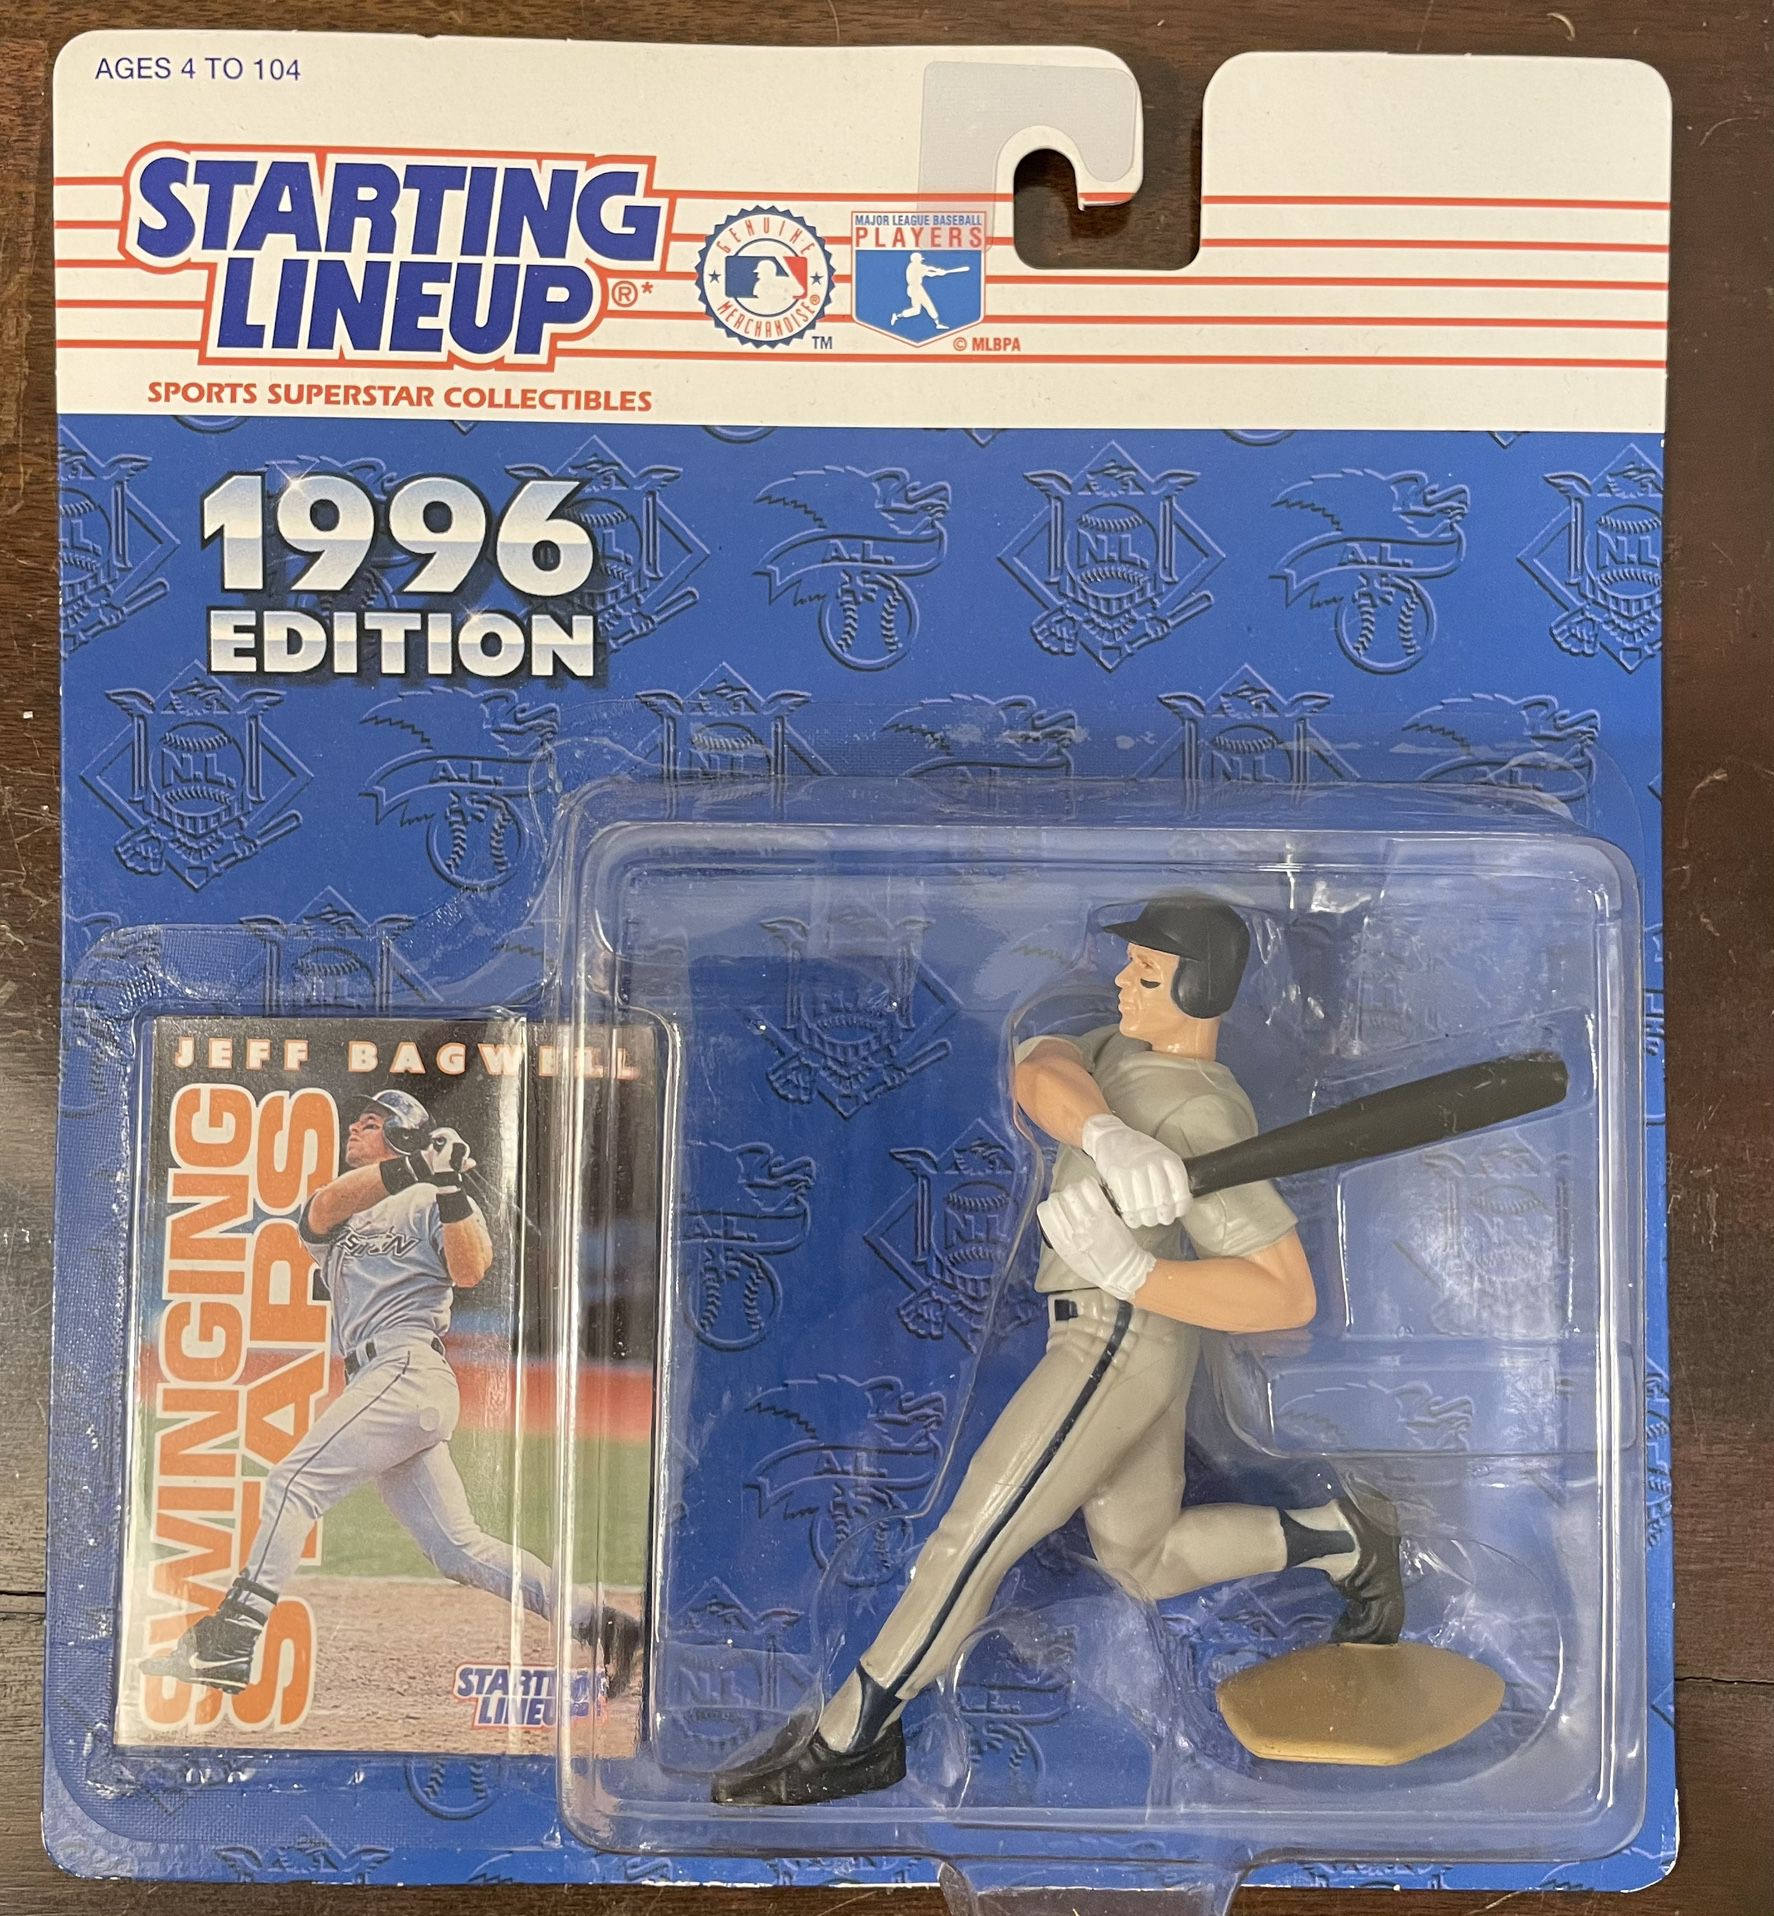 Vintage 1995 Jeff Bagwell Starting Line Up Action Figure- SEALED! Condition is "New" with some light wear on the card. Ships out ASAP! Thanks for look